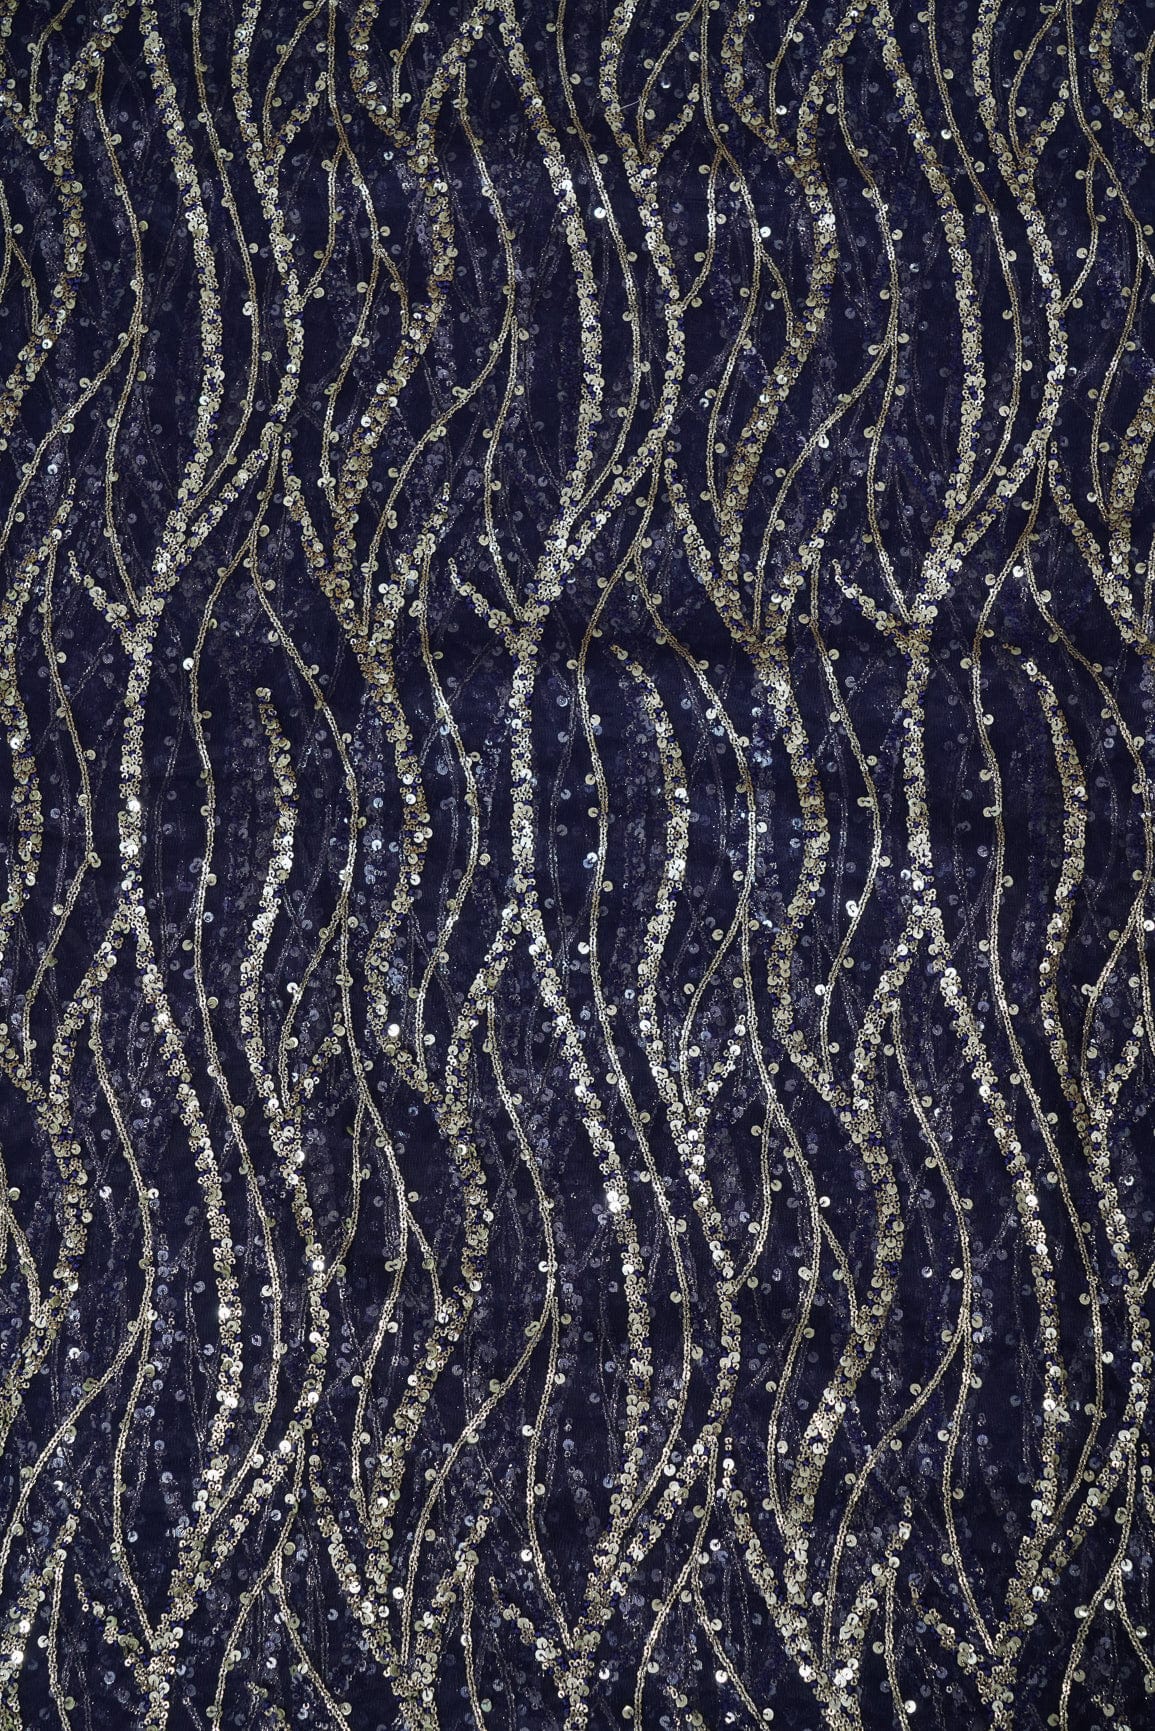 doeraa Embroidery Fabrics Gold Sequins With Navy Blue Thread Embroidery On Navy Blue Soft Net